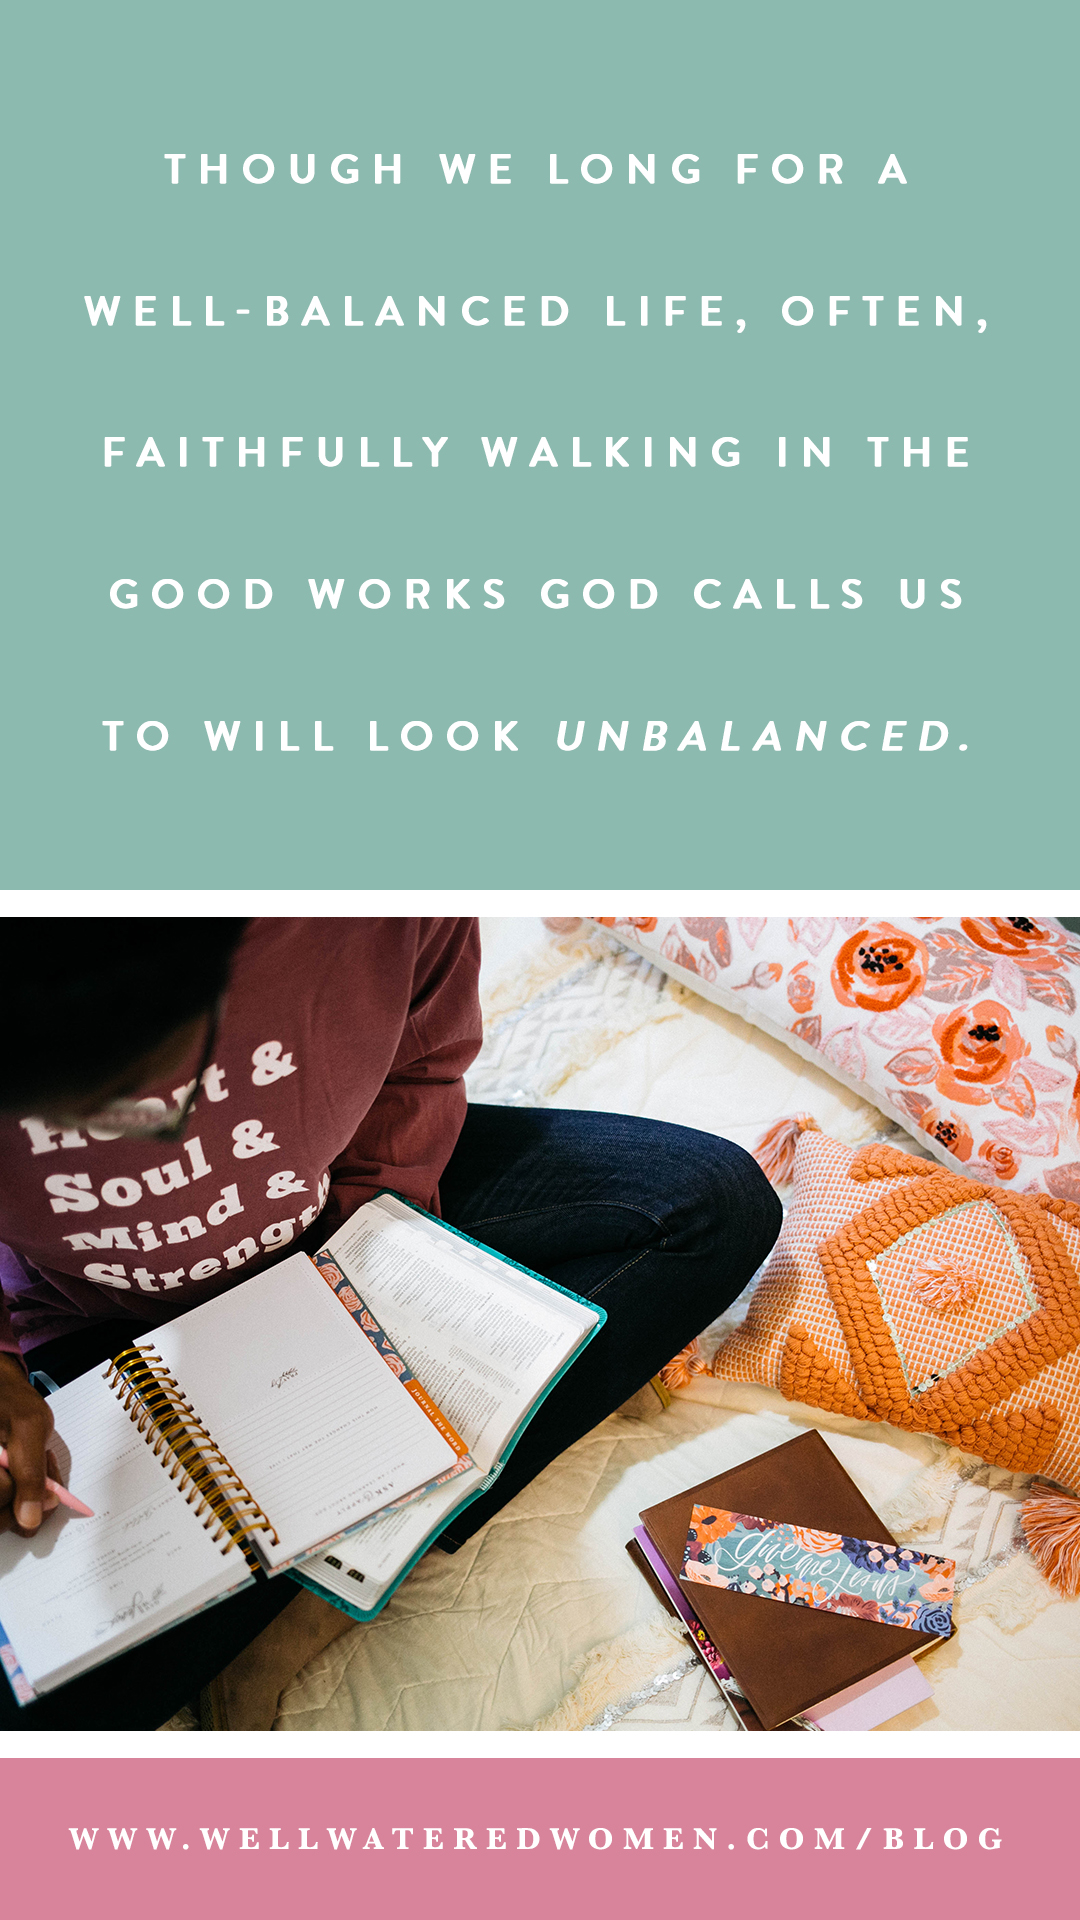 It’s easy to assume this is the good and godly goal—to hold everything in perfect balance, allotting equal portions of my time and energy to every endeavor. But God calls his people to faithful obedience, not balance (1 Timothy 2:2–3; 1 Thessalonians 4:11). He has prepared good works in advance for us (Ephesians 2:10). Often, faithfully walking in those good works will look unbalanced.